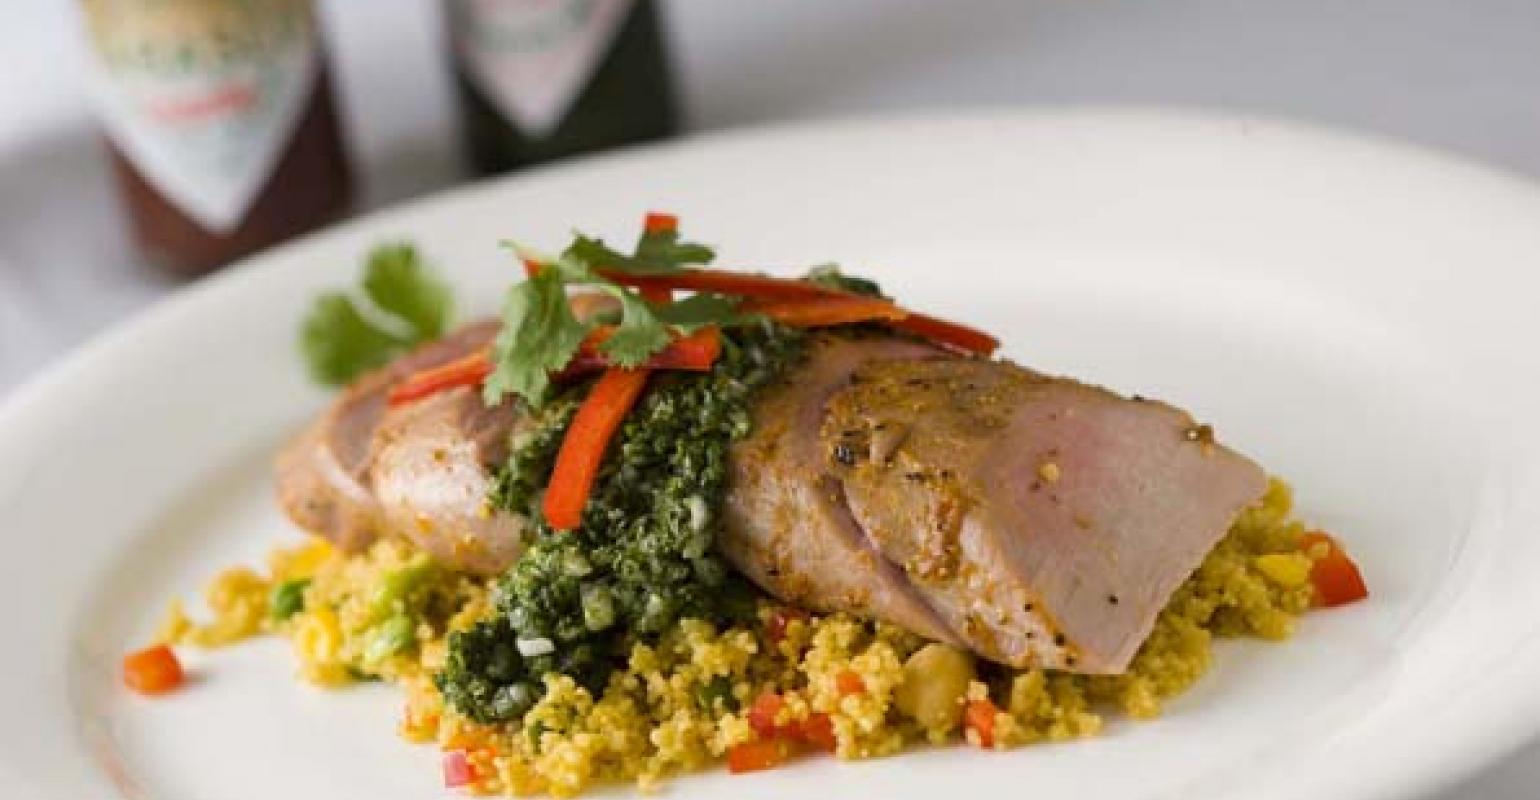 Roasted Pork Loin with Fennel and Herb Couscous